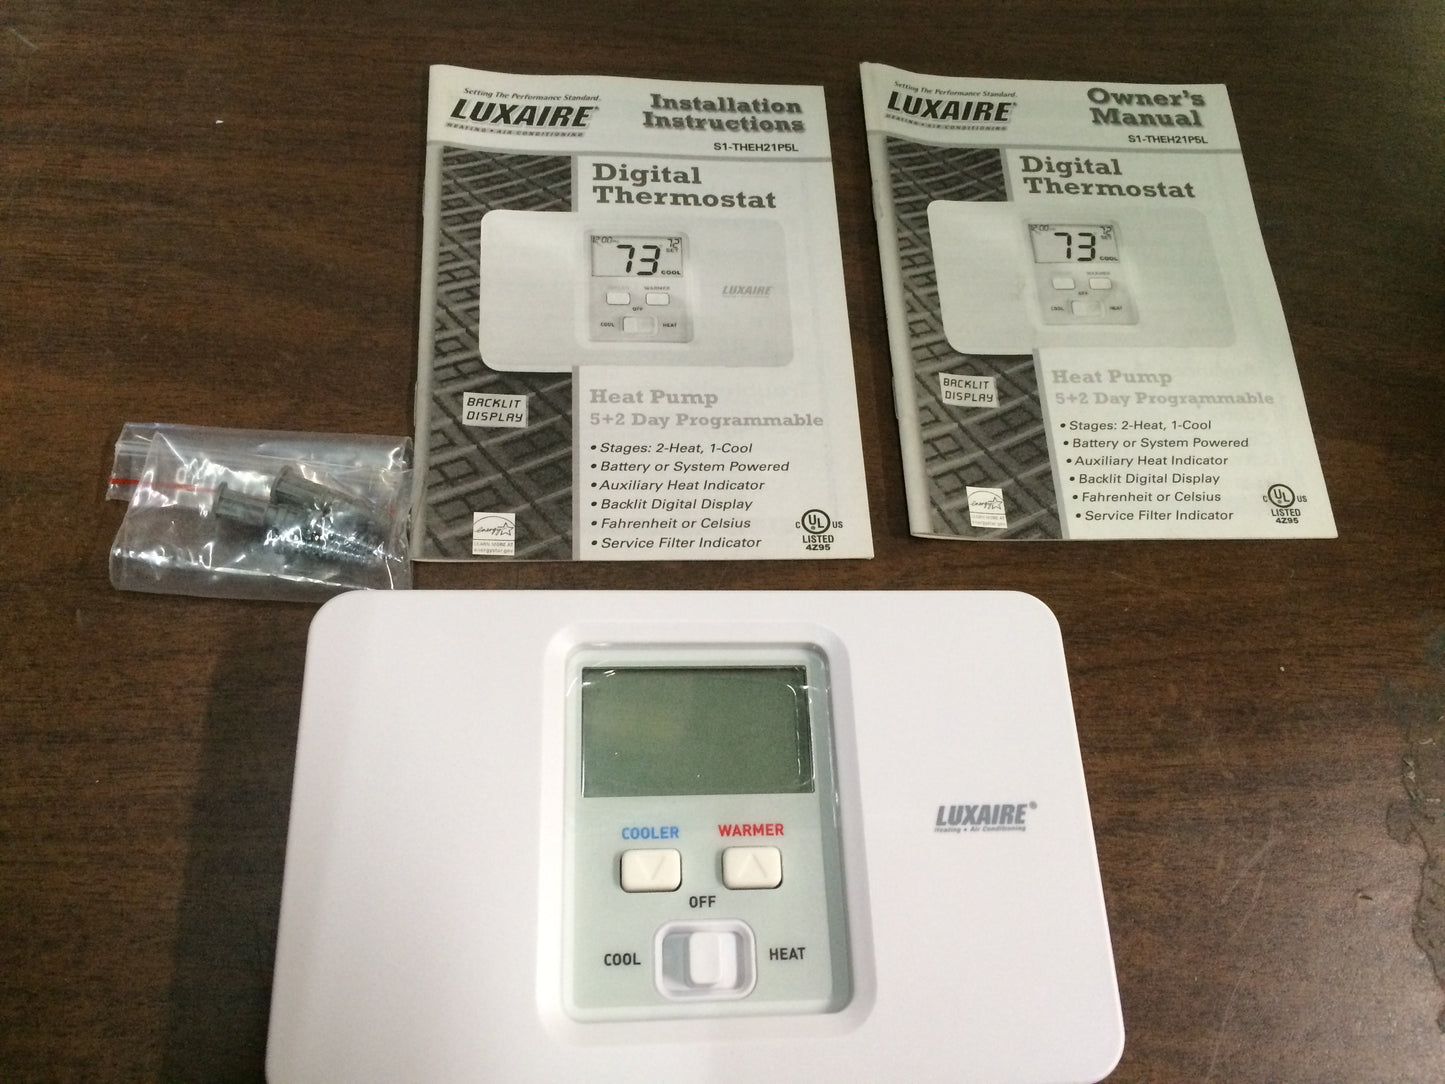 2 HEAT/1 COOL 5+2 DAY PROGRAMMABLE THERMOSTAT